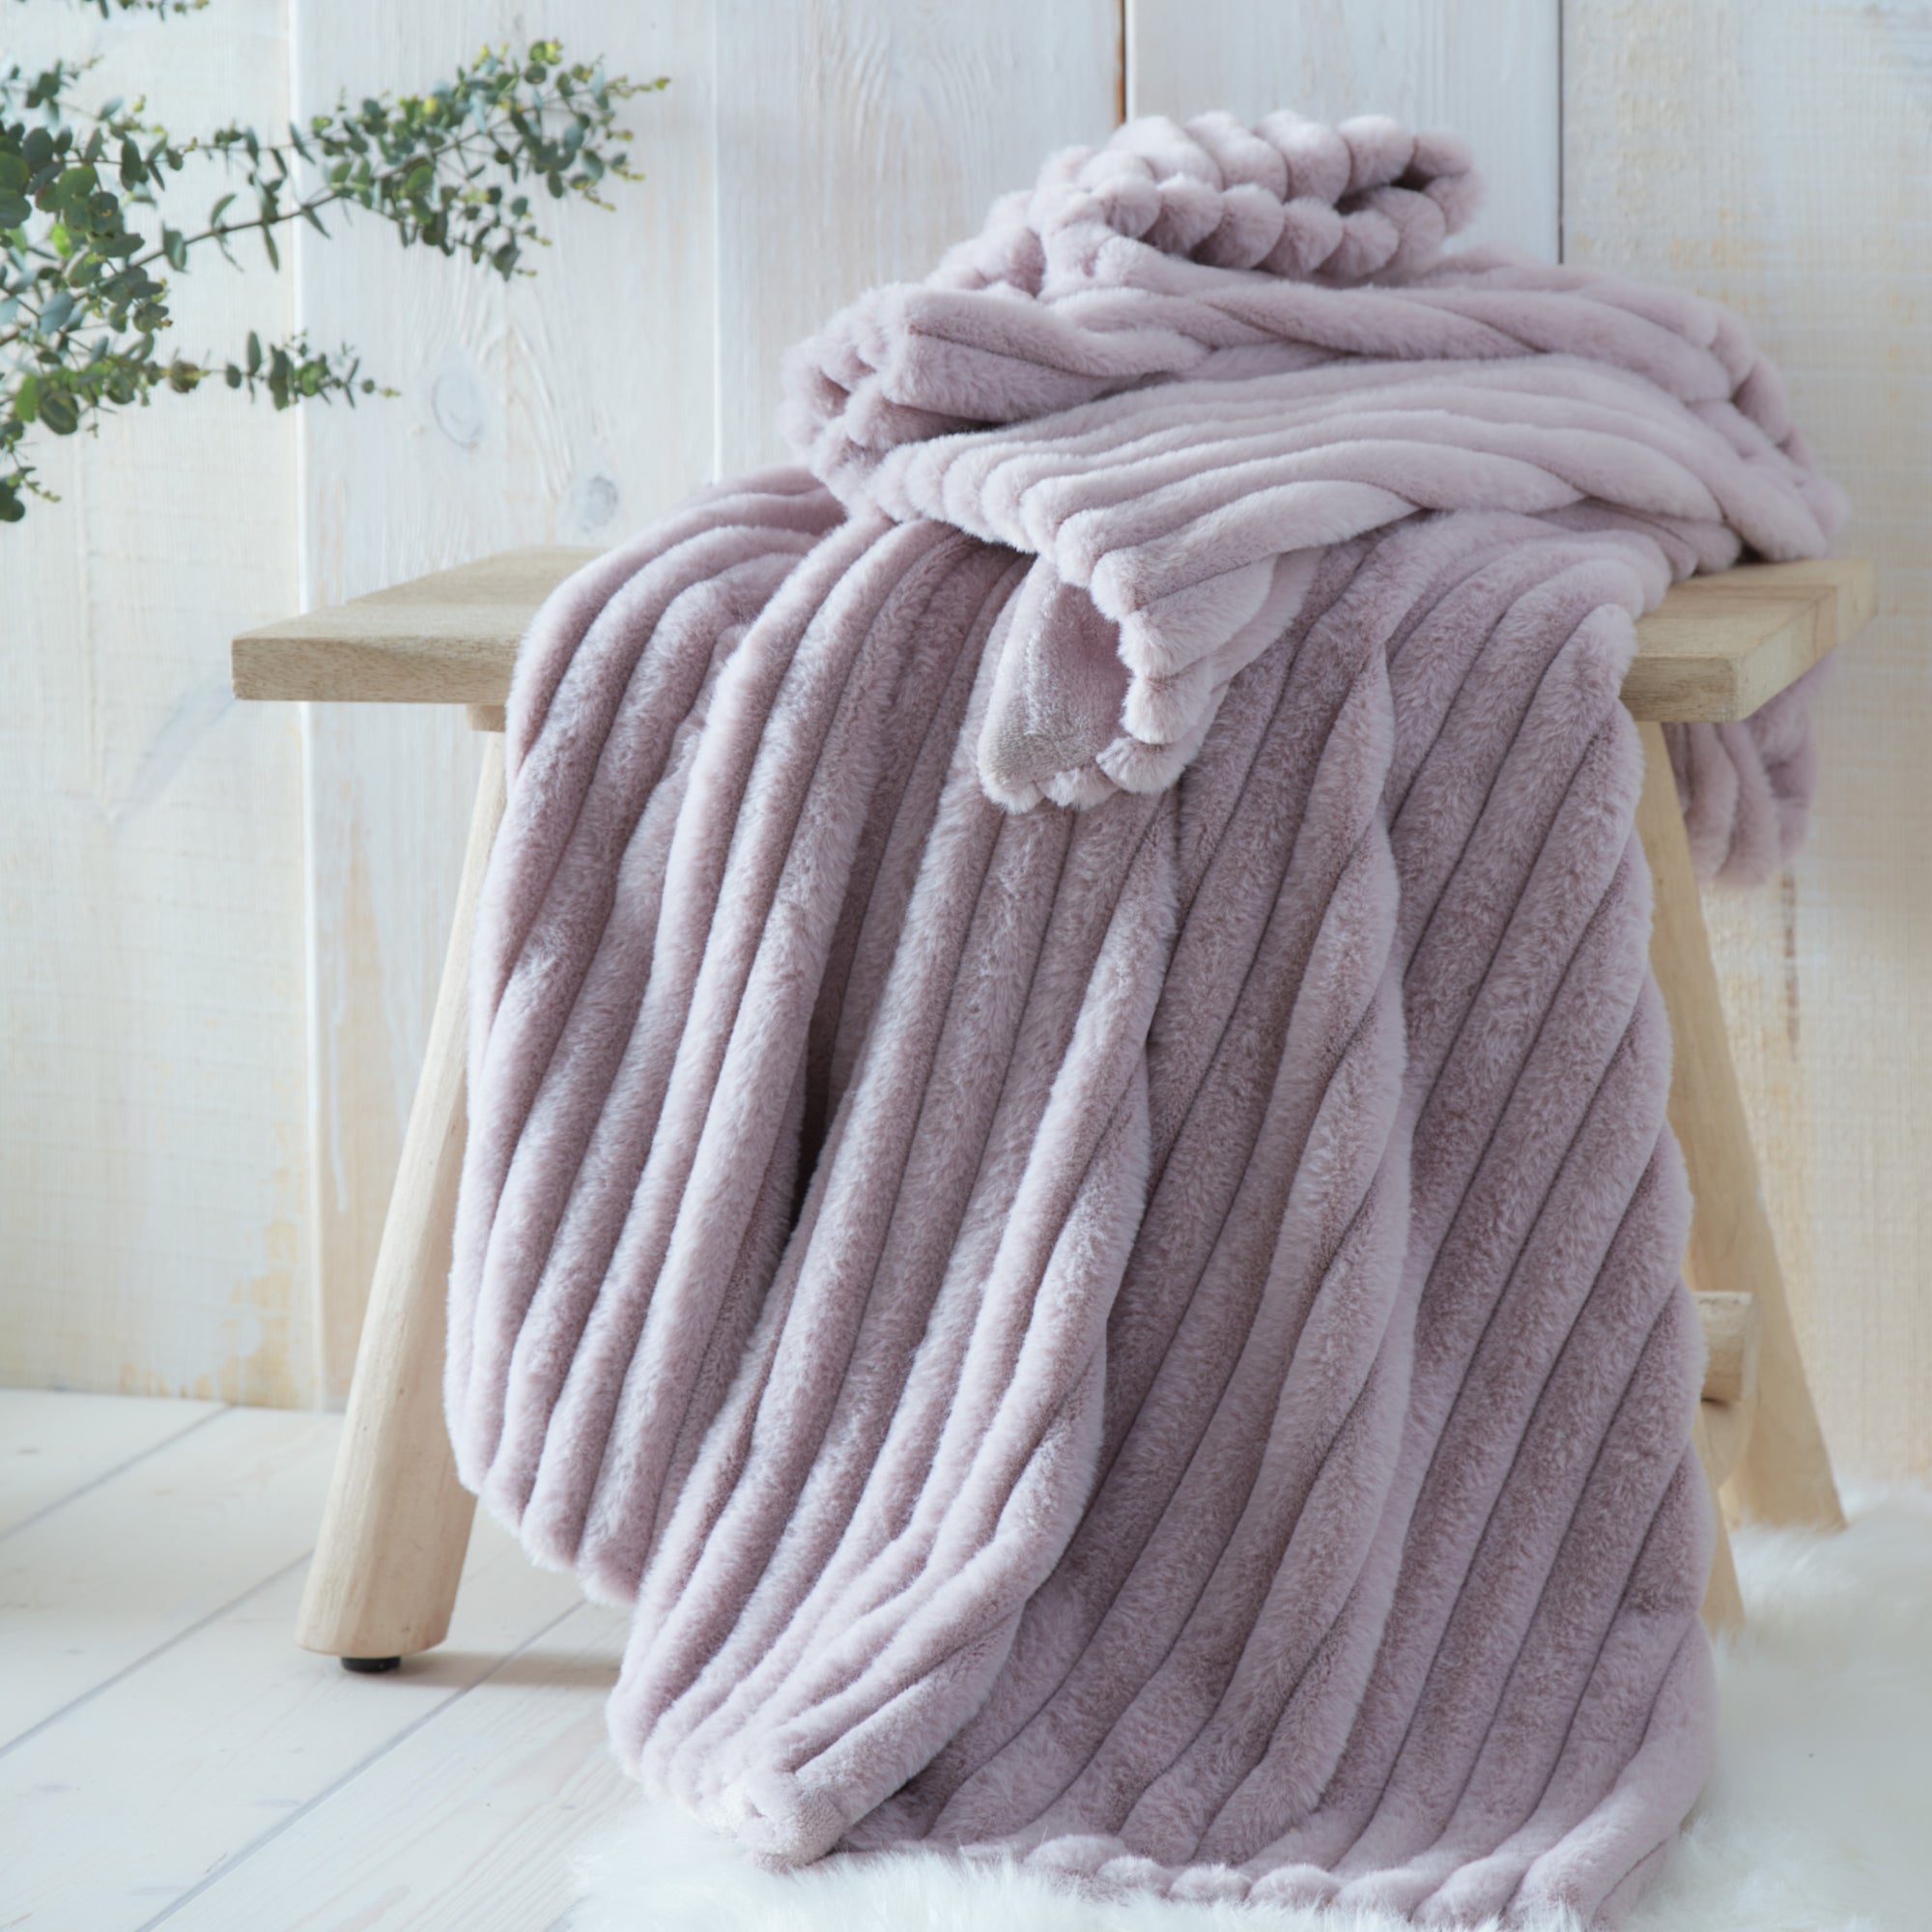 Throw Morritz by Appletree Hygge in Mauve